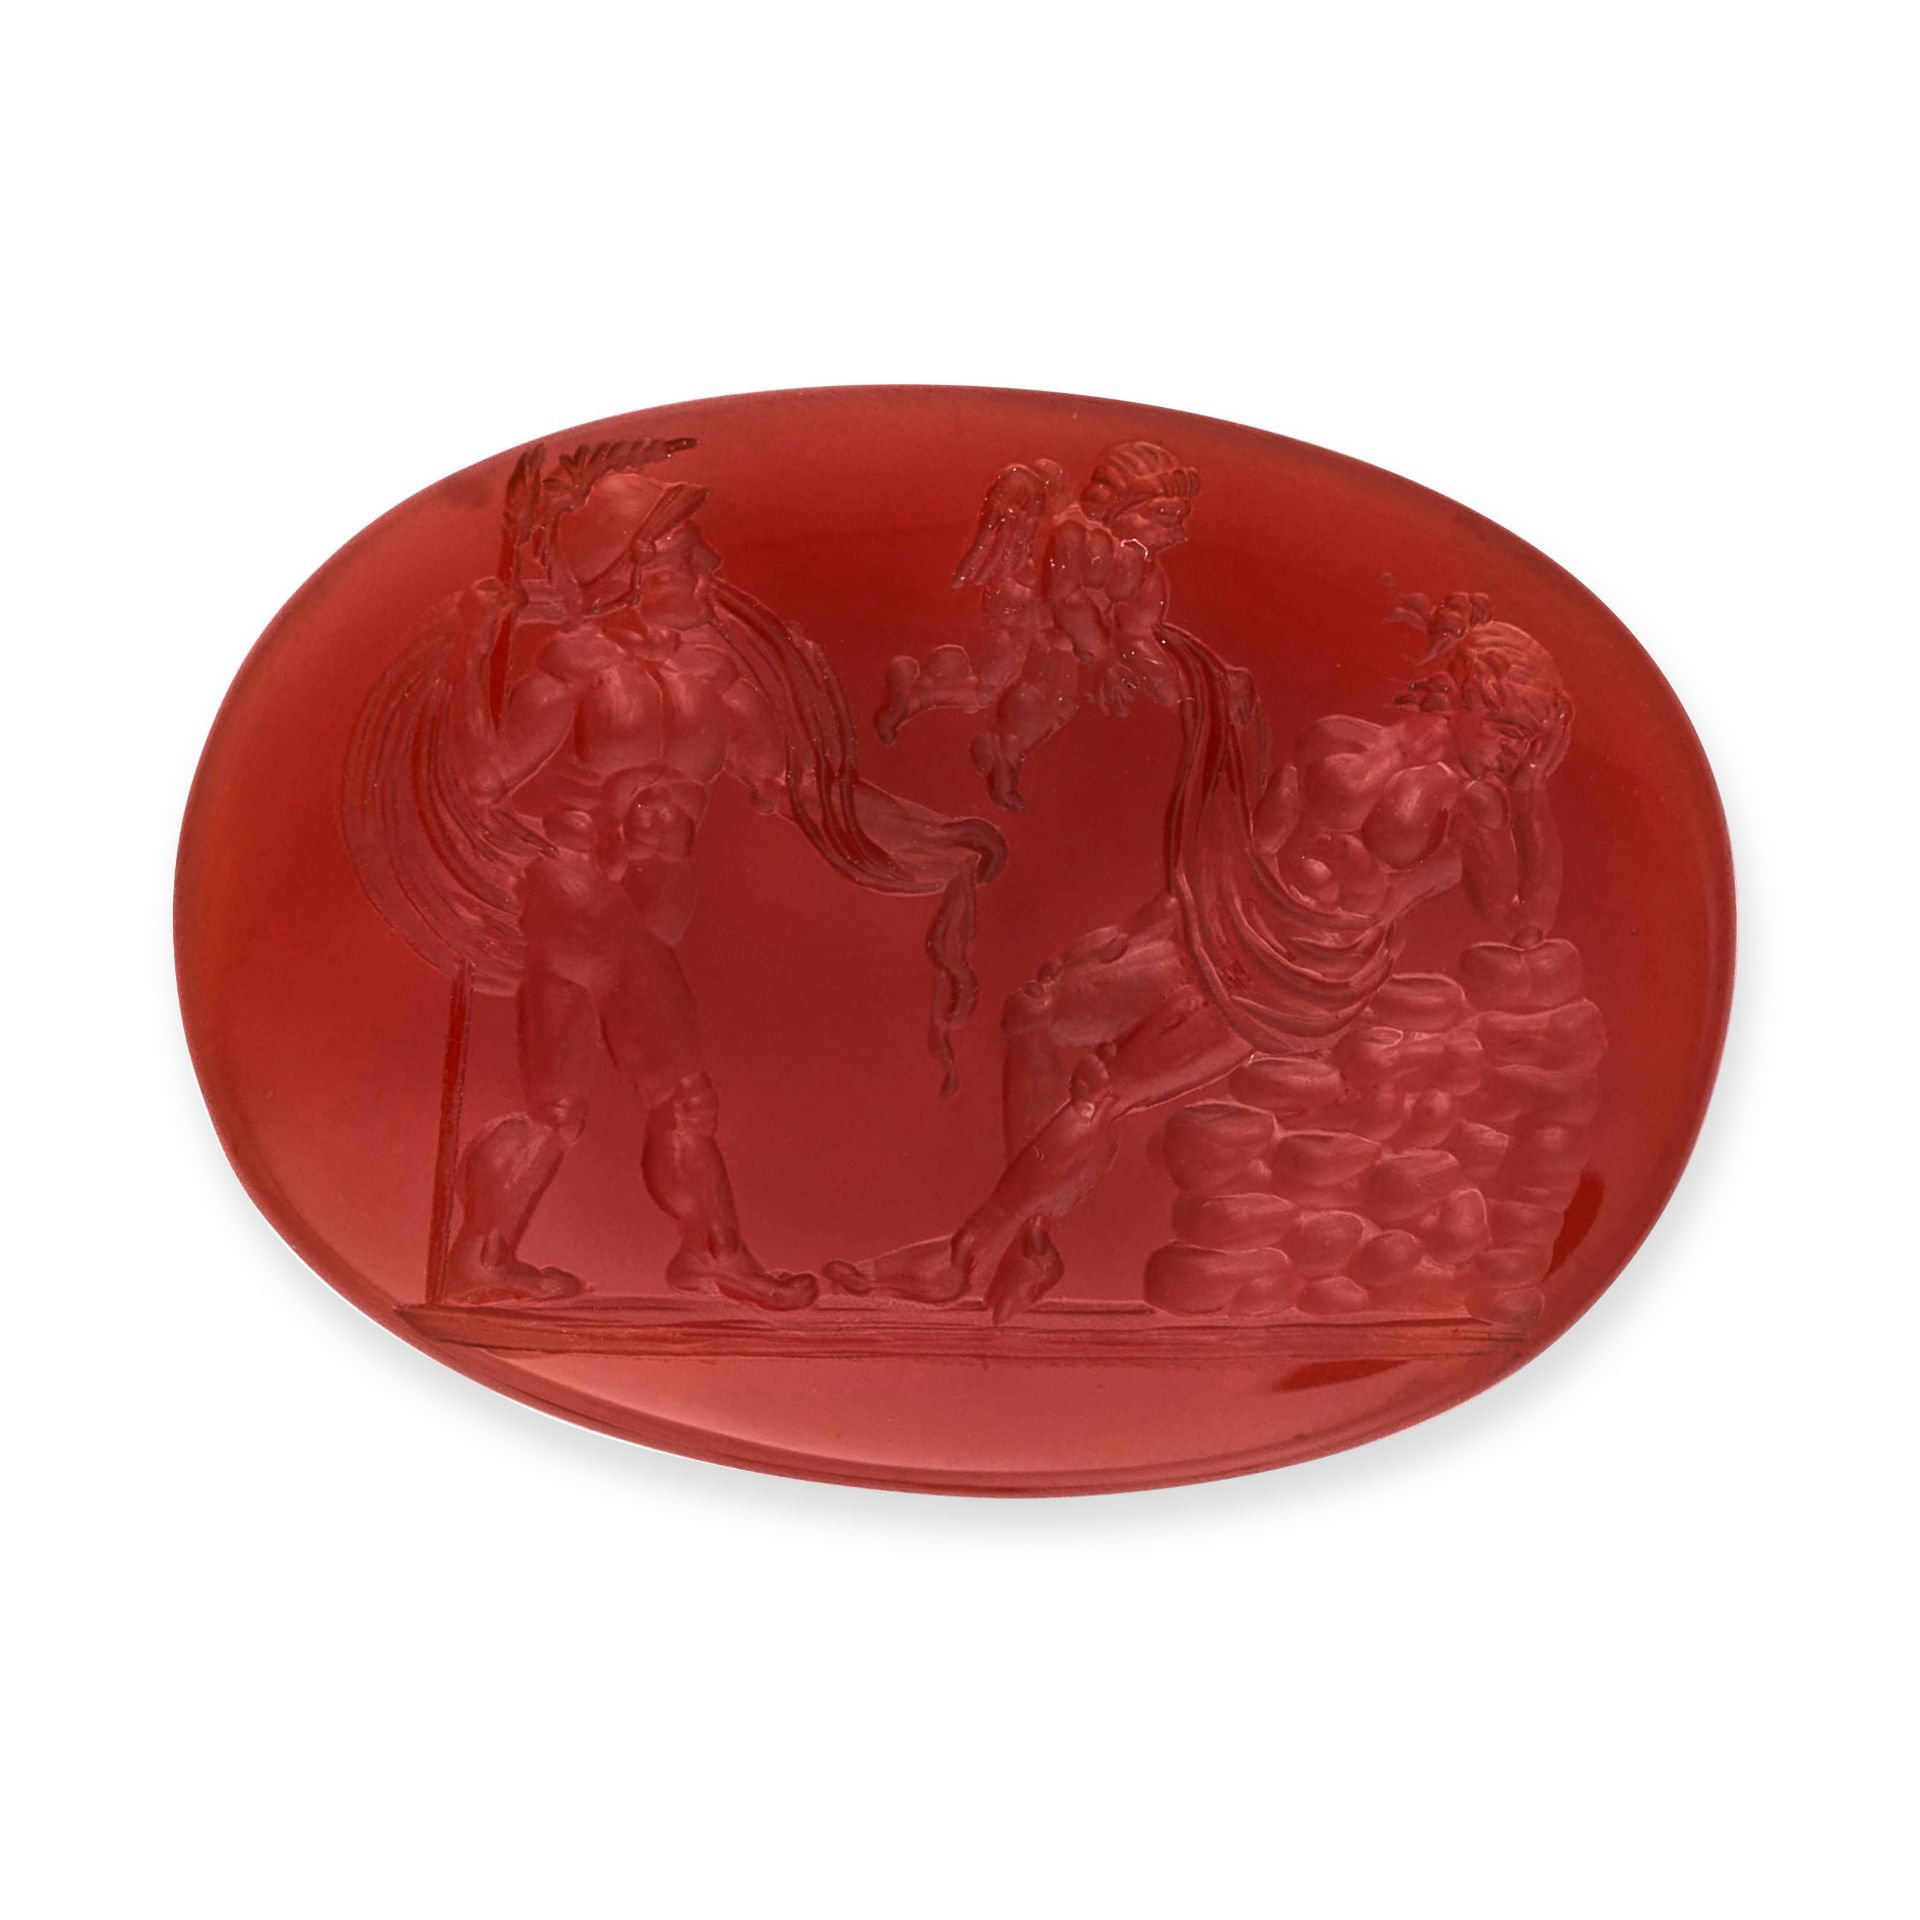 A CARNELIAN INTAGLIO the carnelian carved to depict Mars, Venus and Cupid, 4.2cm, 10.6g.